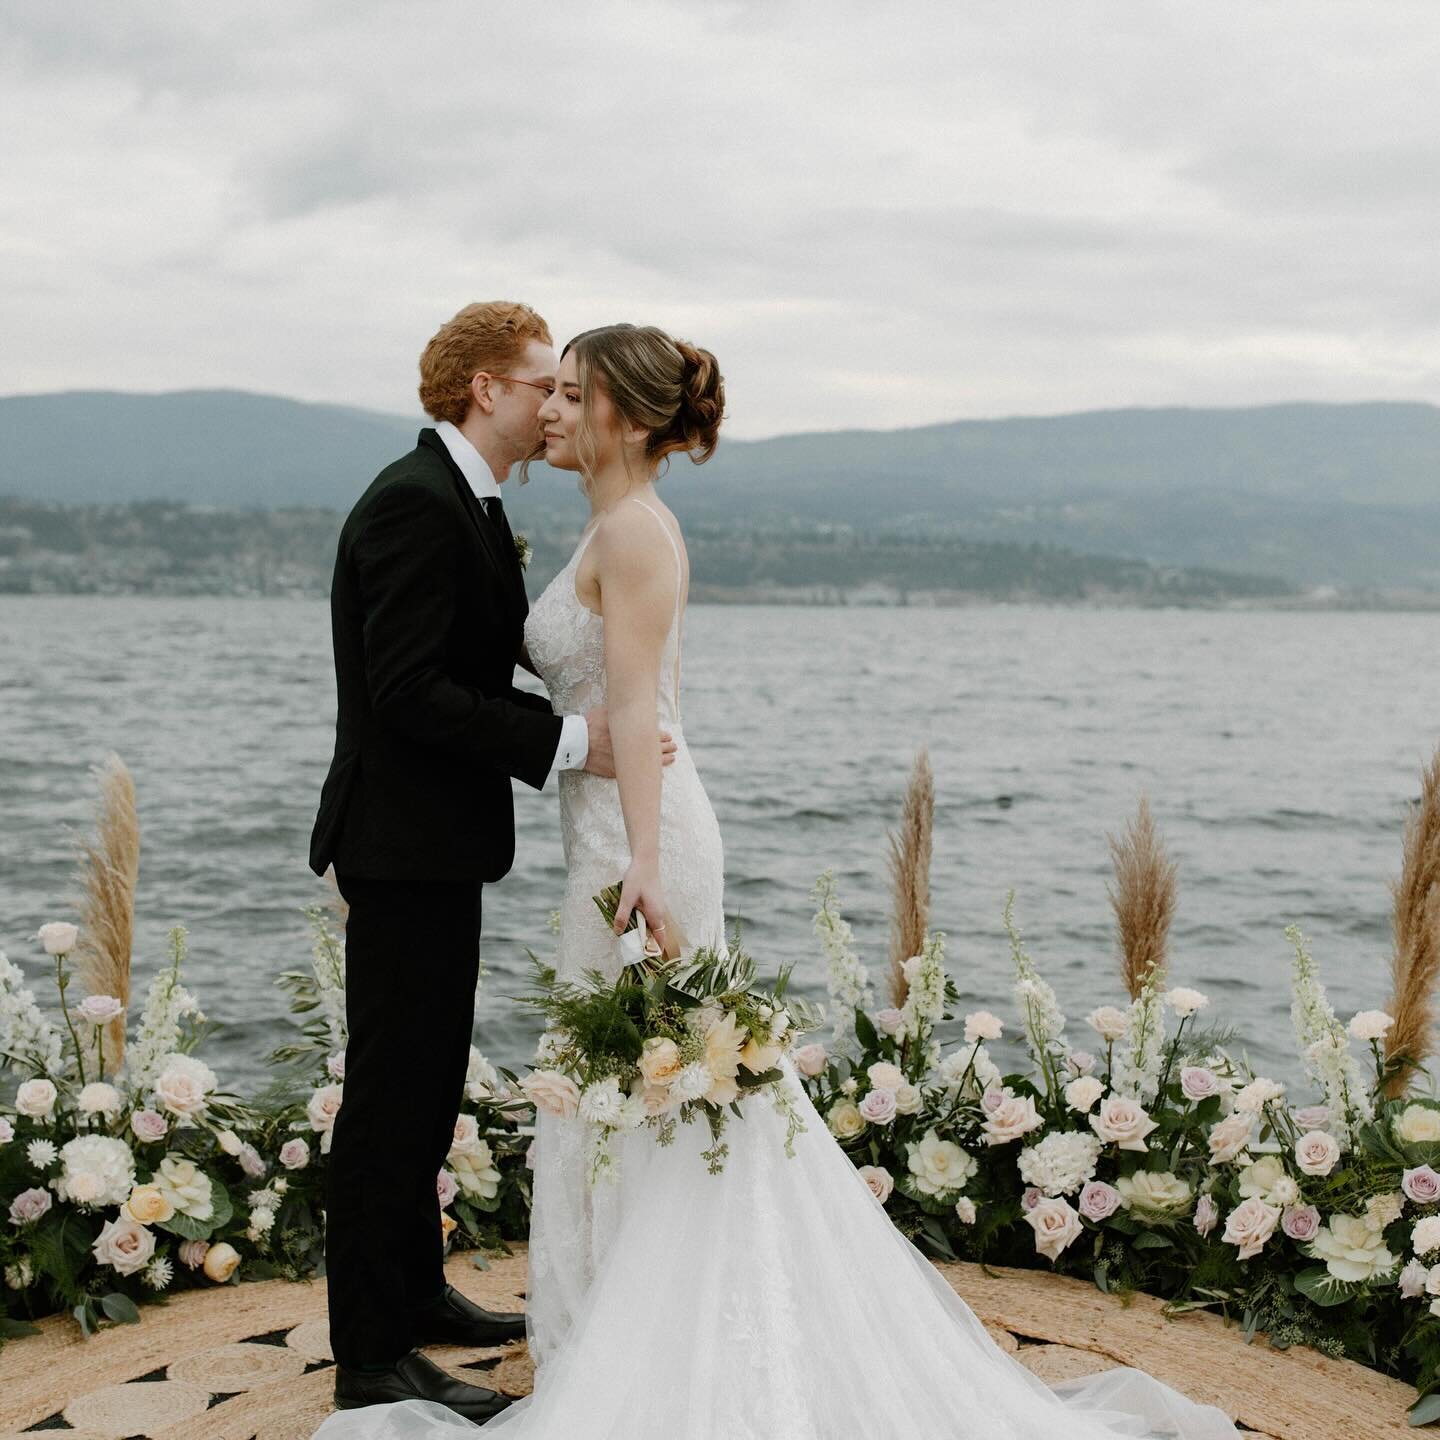 ✨ On the blog ✨

We are excited to share our first blog post to our website! Today&rsquo;s feature is all about this gorgeous shoot we put on in Kelowna at the Eldorado Resort. The only place in Kelowna you can share your vows directly on the water. 